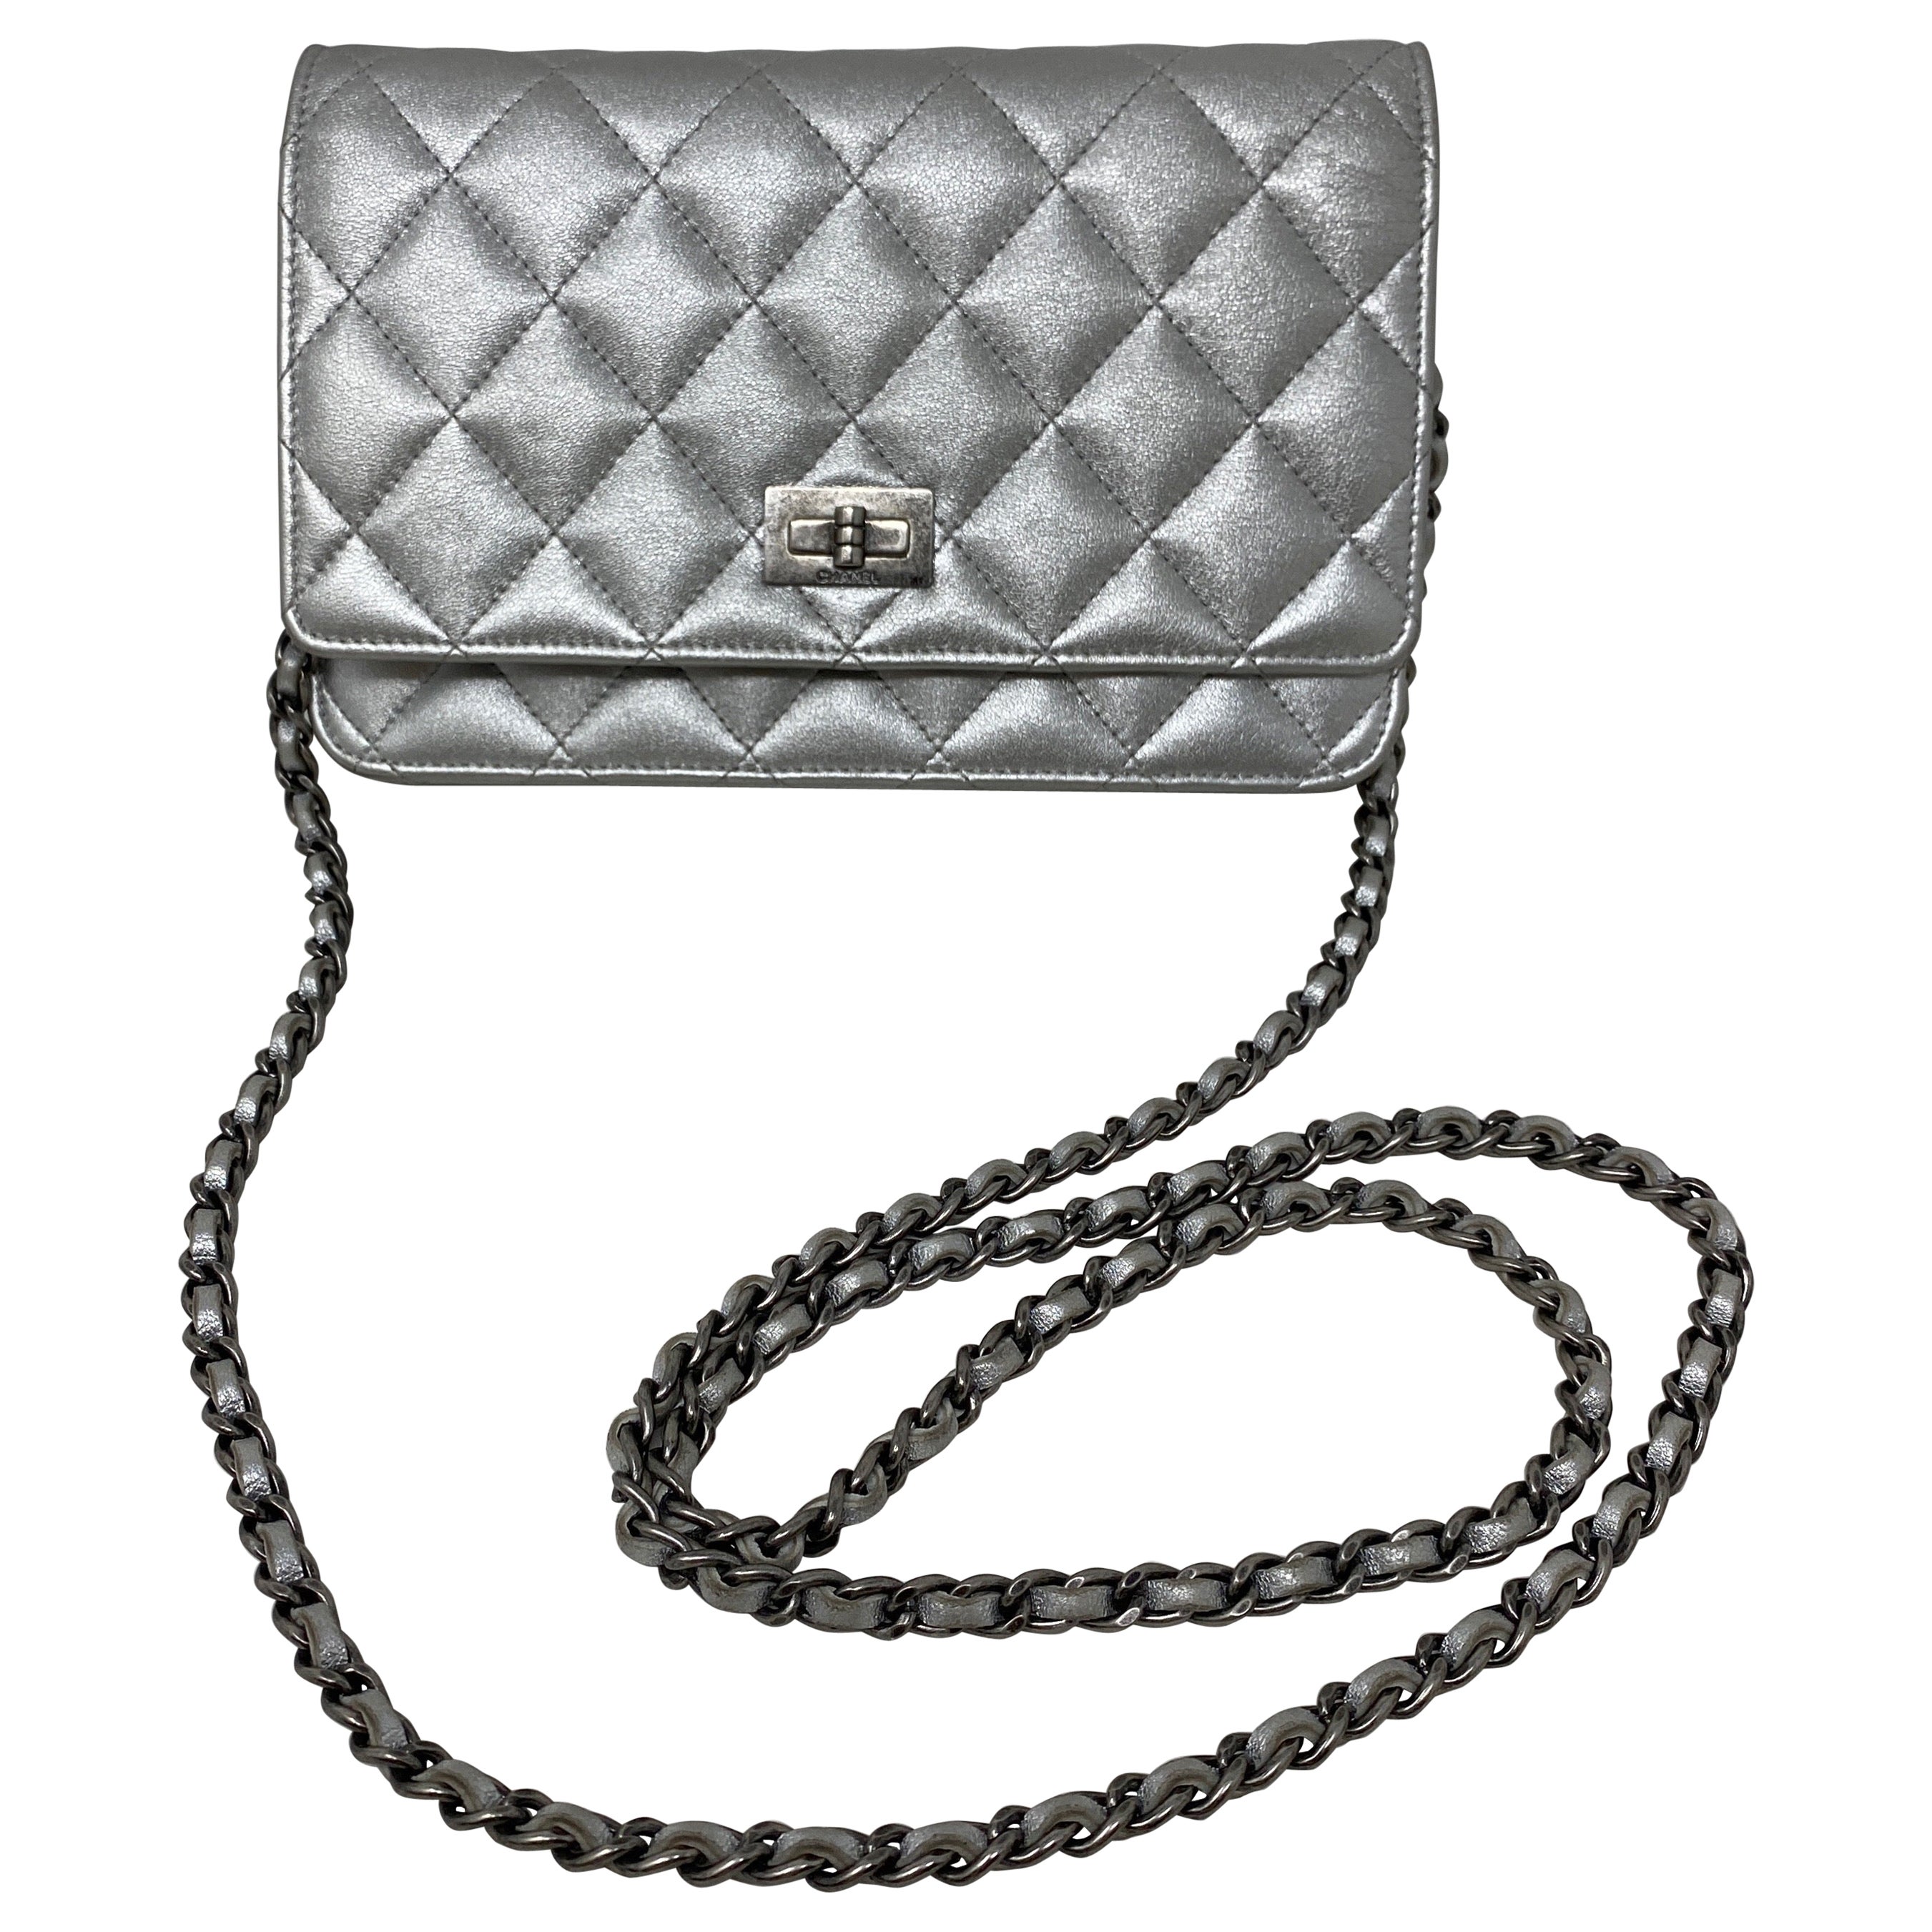 Chanel Silver Reissue Wallet On A Chain Bag